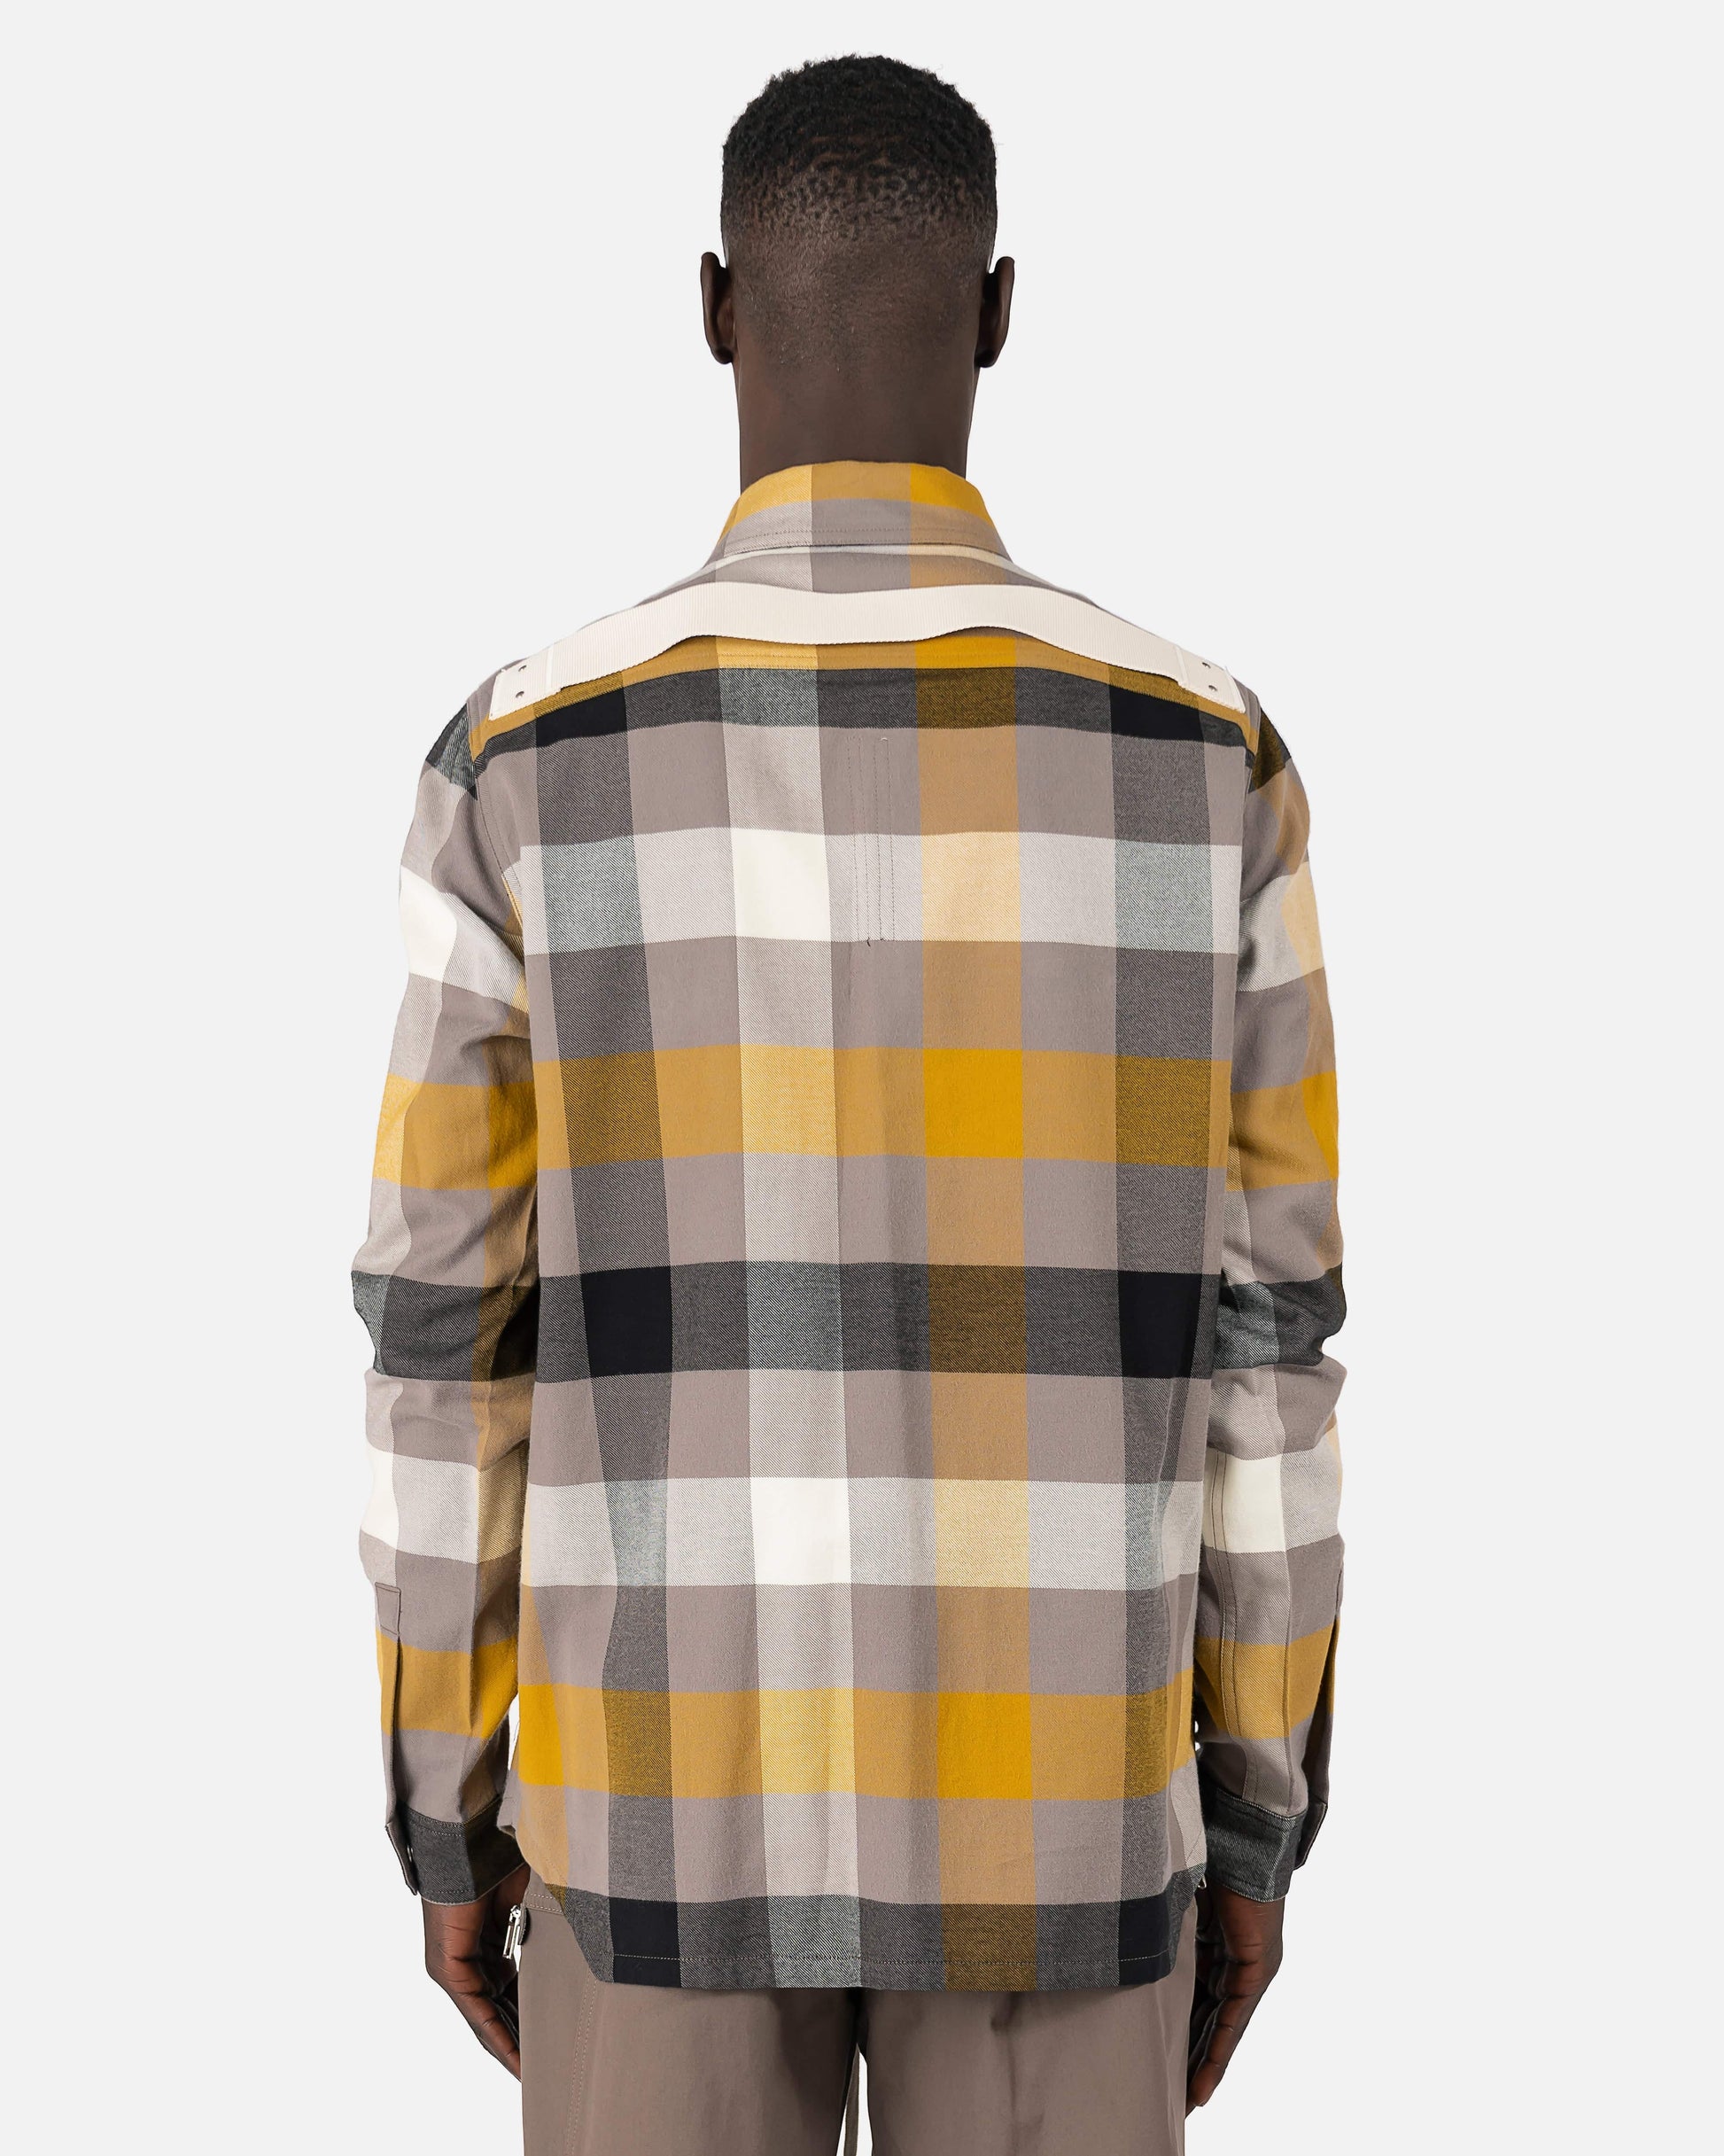 Rick Owens Men's Jackets Outershirt in Dust Plaid